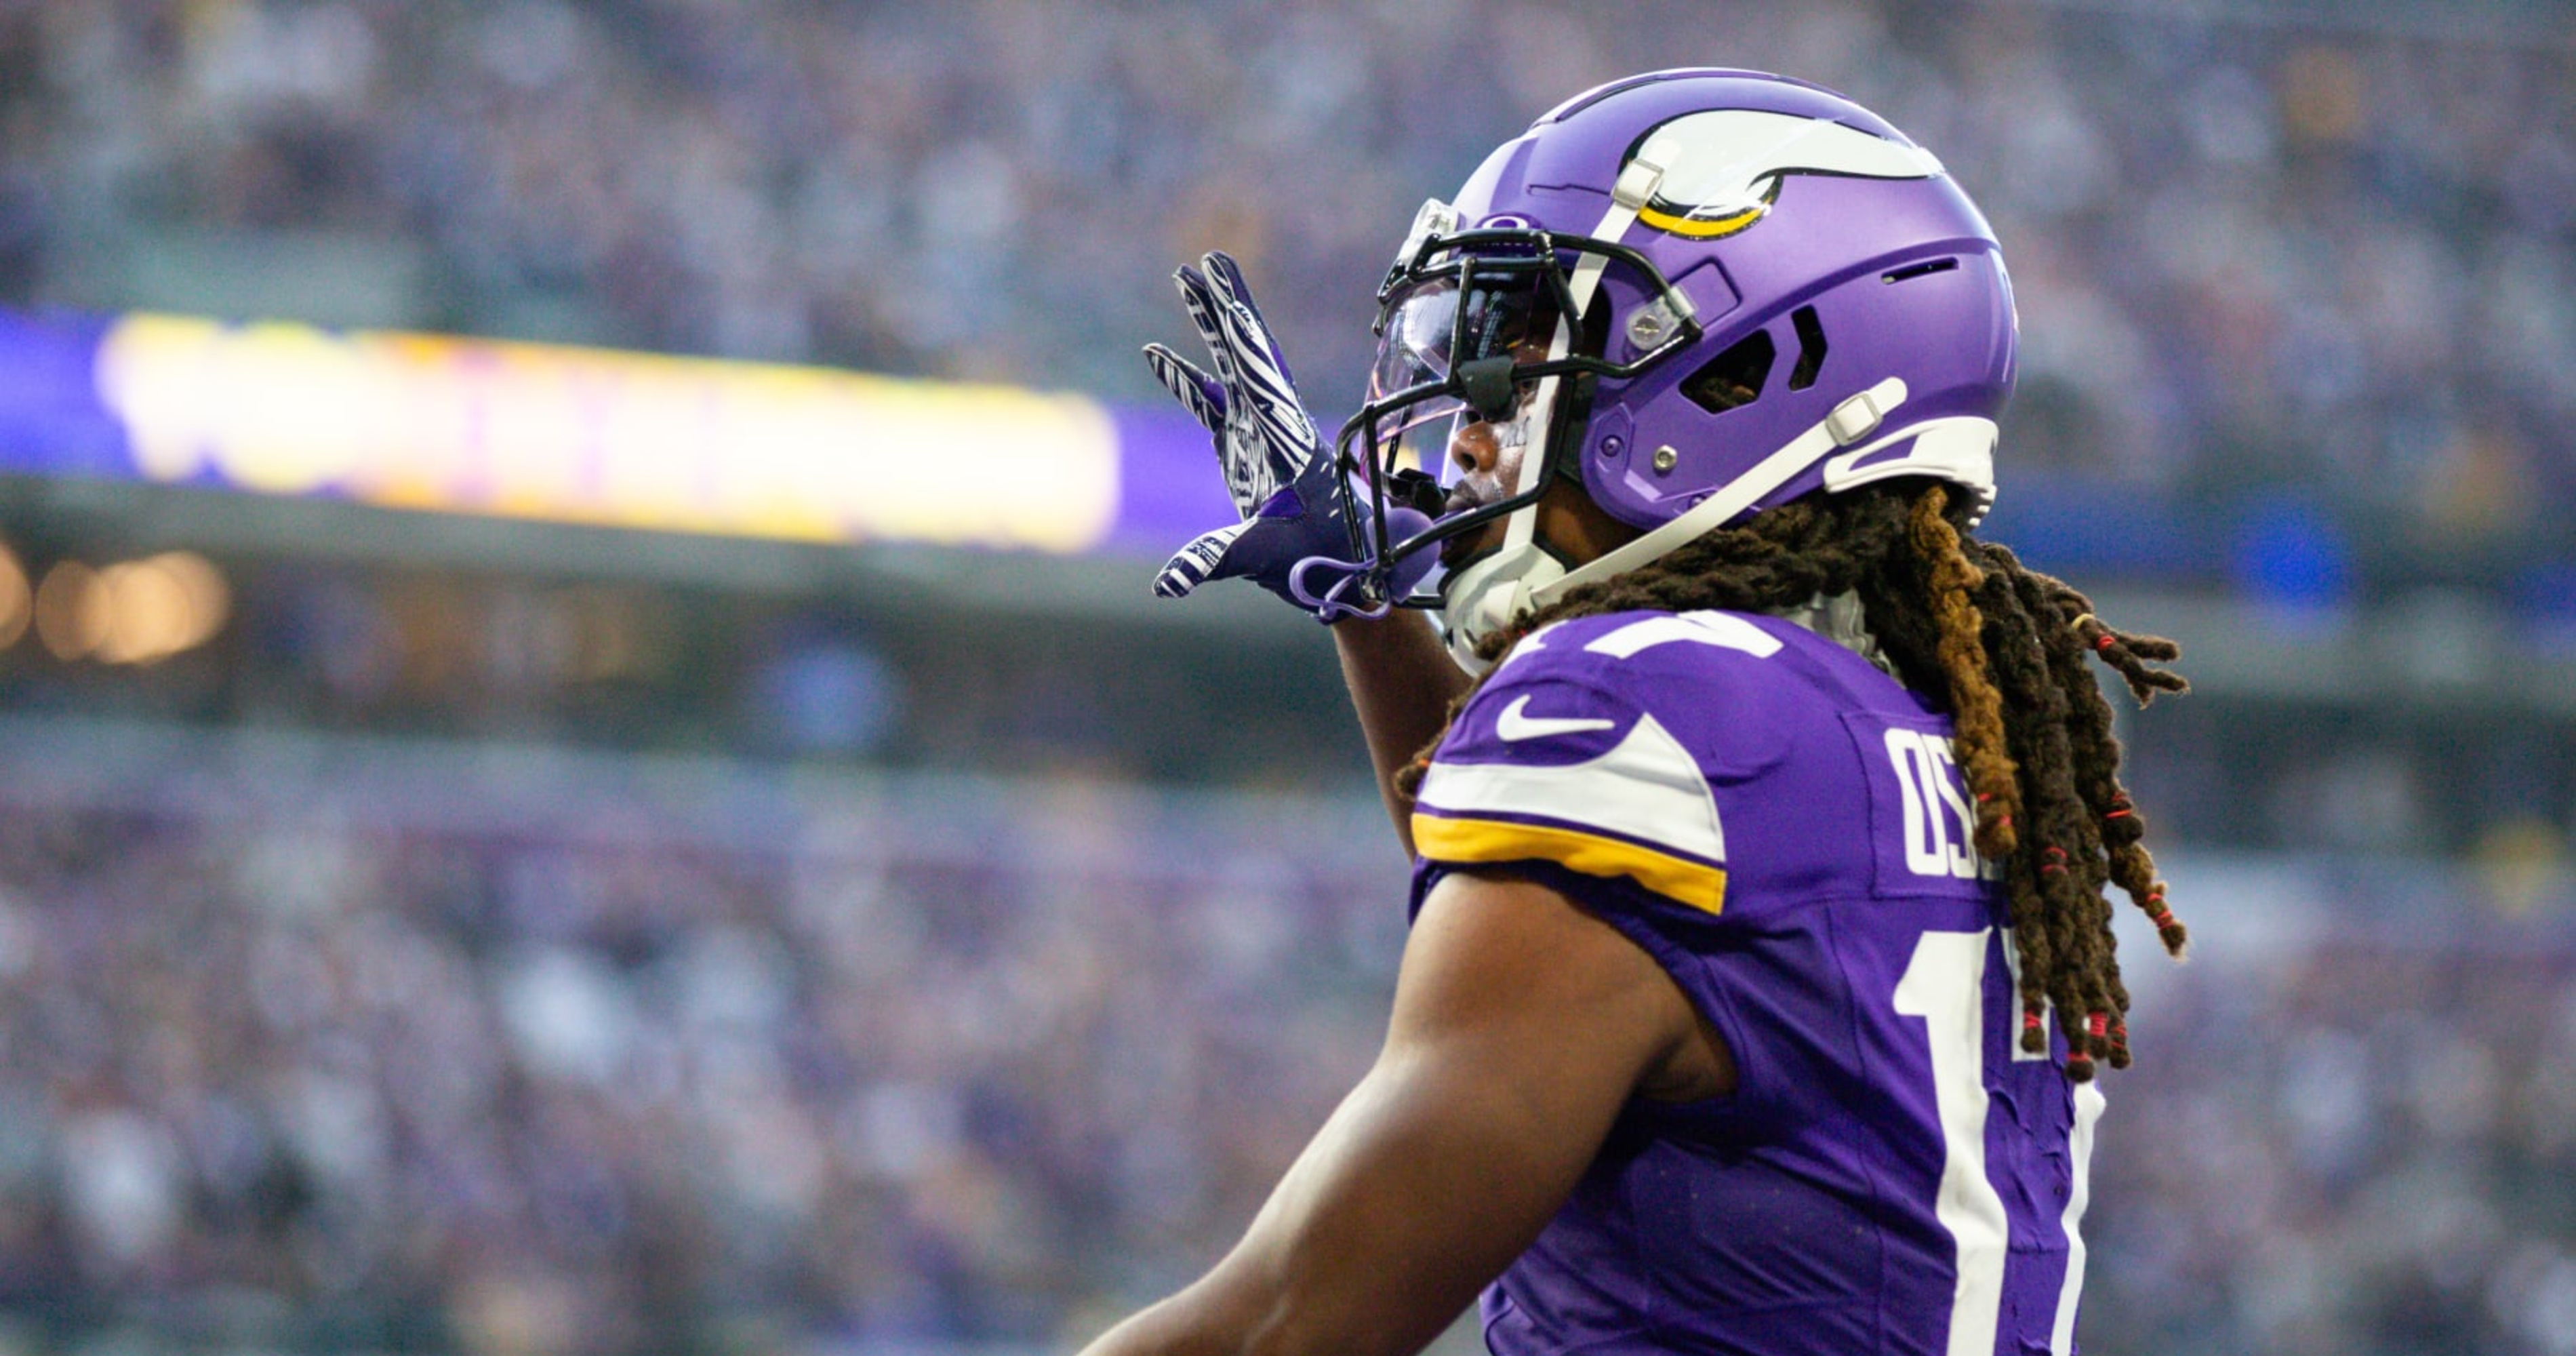 The Vikings fantasy football sleeper you need to have on your